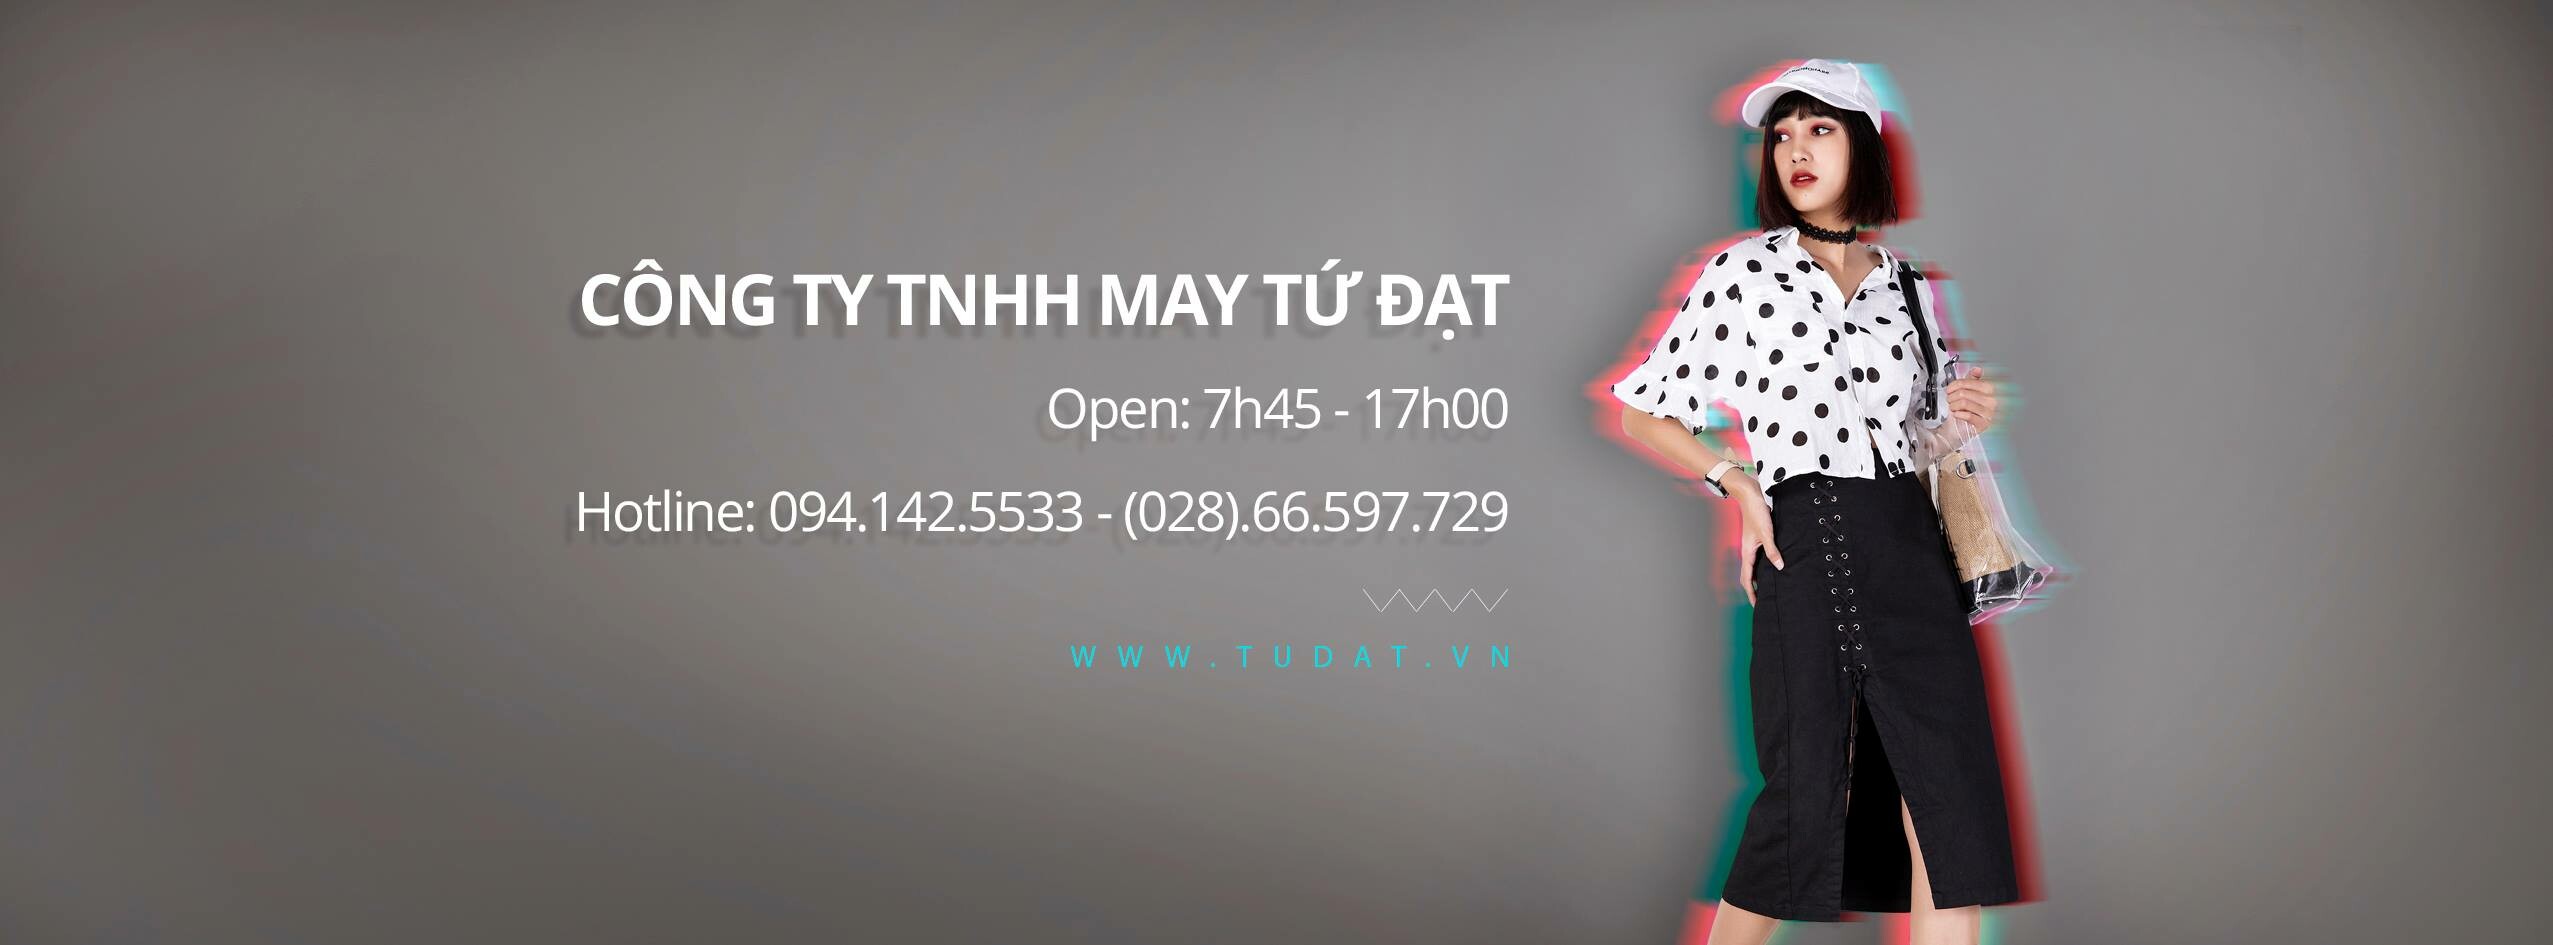 Cover image for May Tứ Đạt